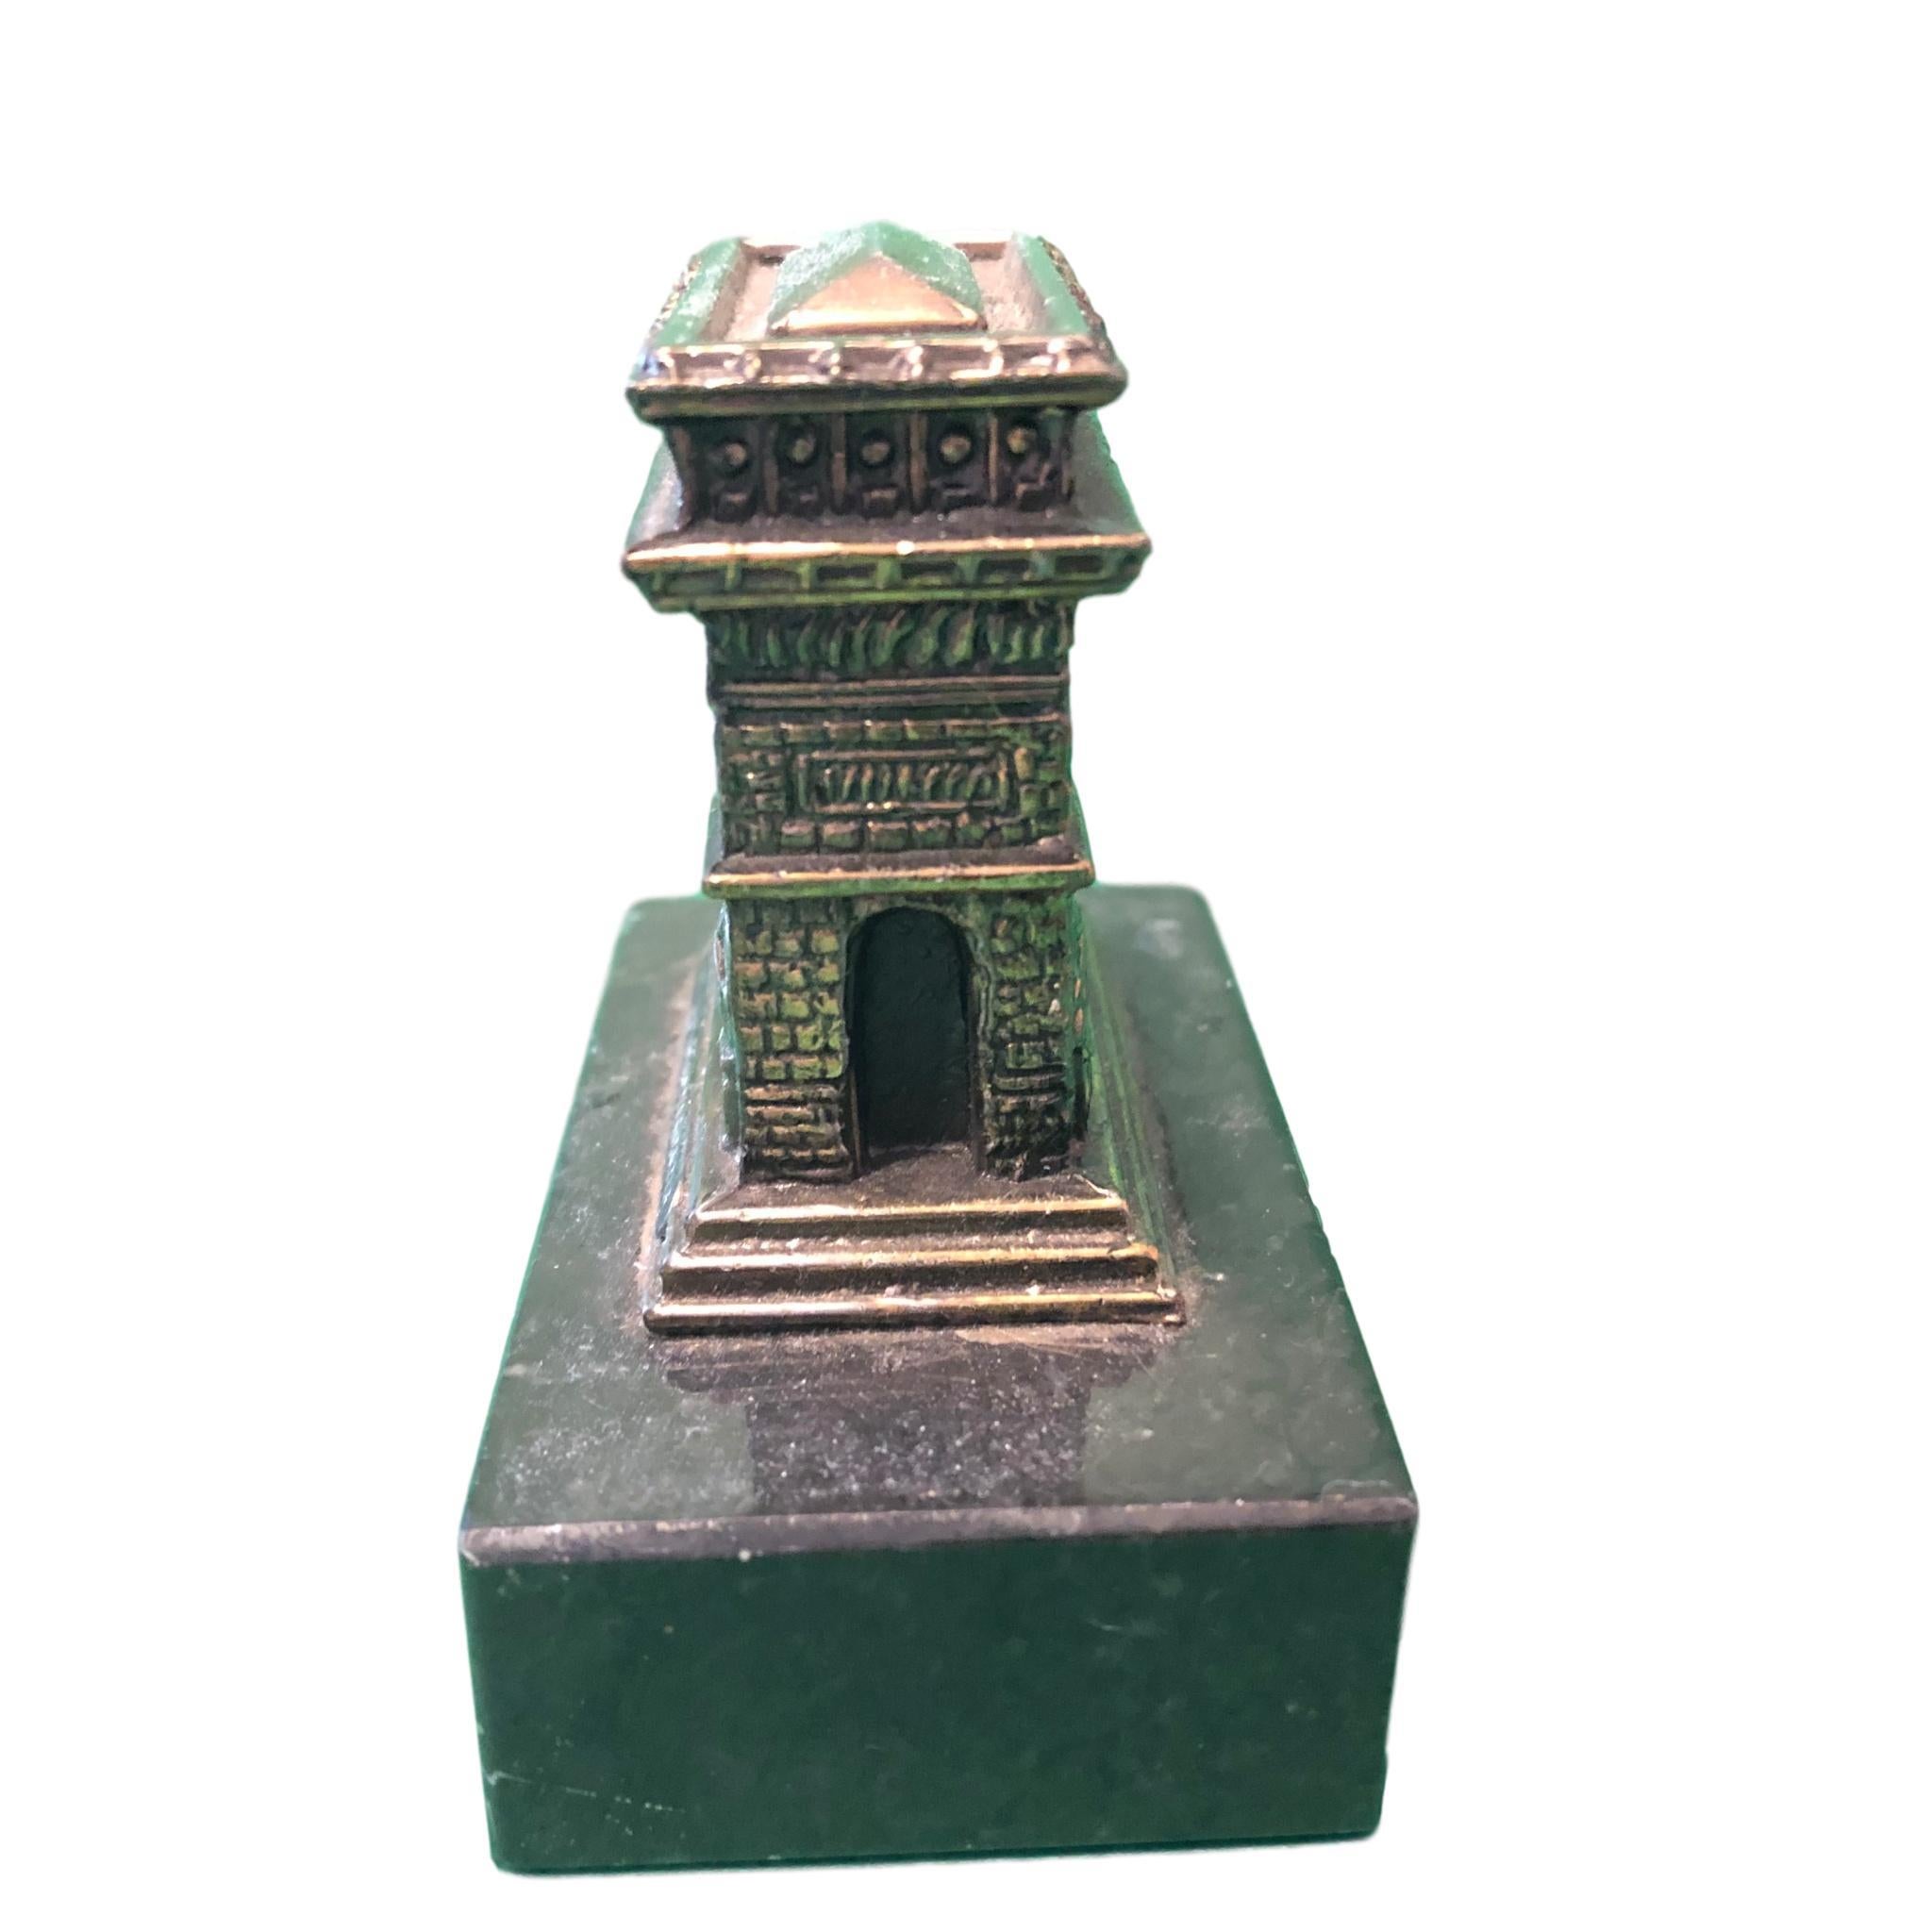 A Arc De Triomphe 1950s Souvenir building architectural model. Some wear with a nice patina, but this is old-age. Made of metal on a marble base. This was bought as a souvenir in Paris, France. A beautiful nice desktop item or just a display item in